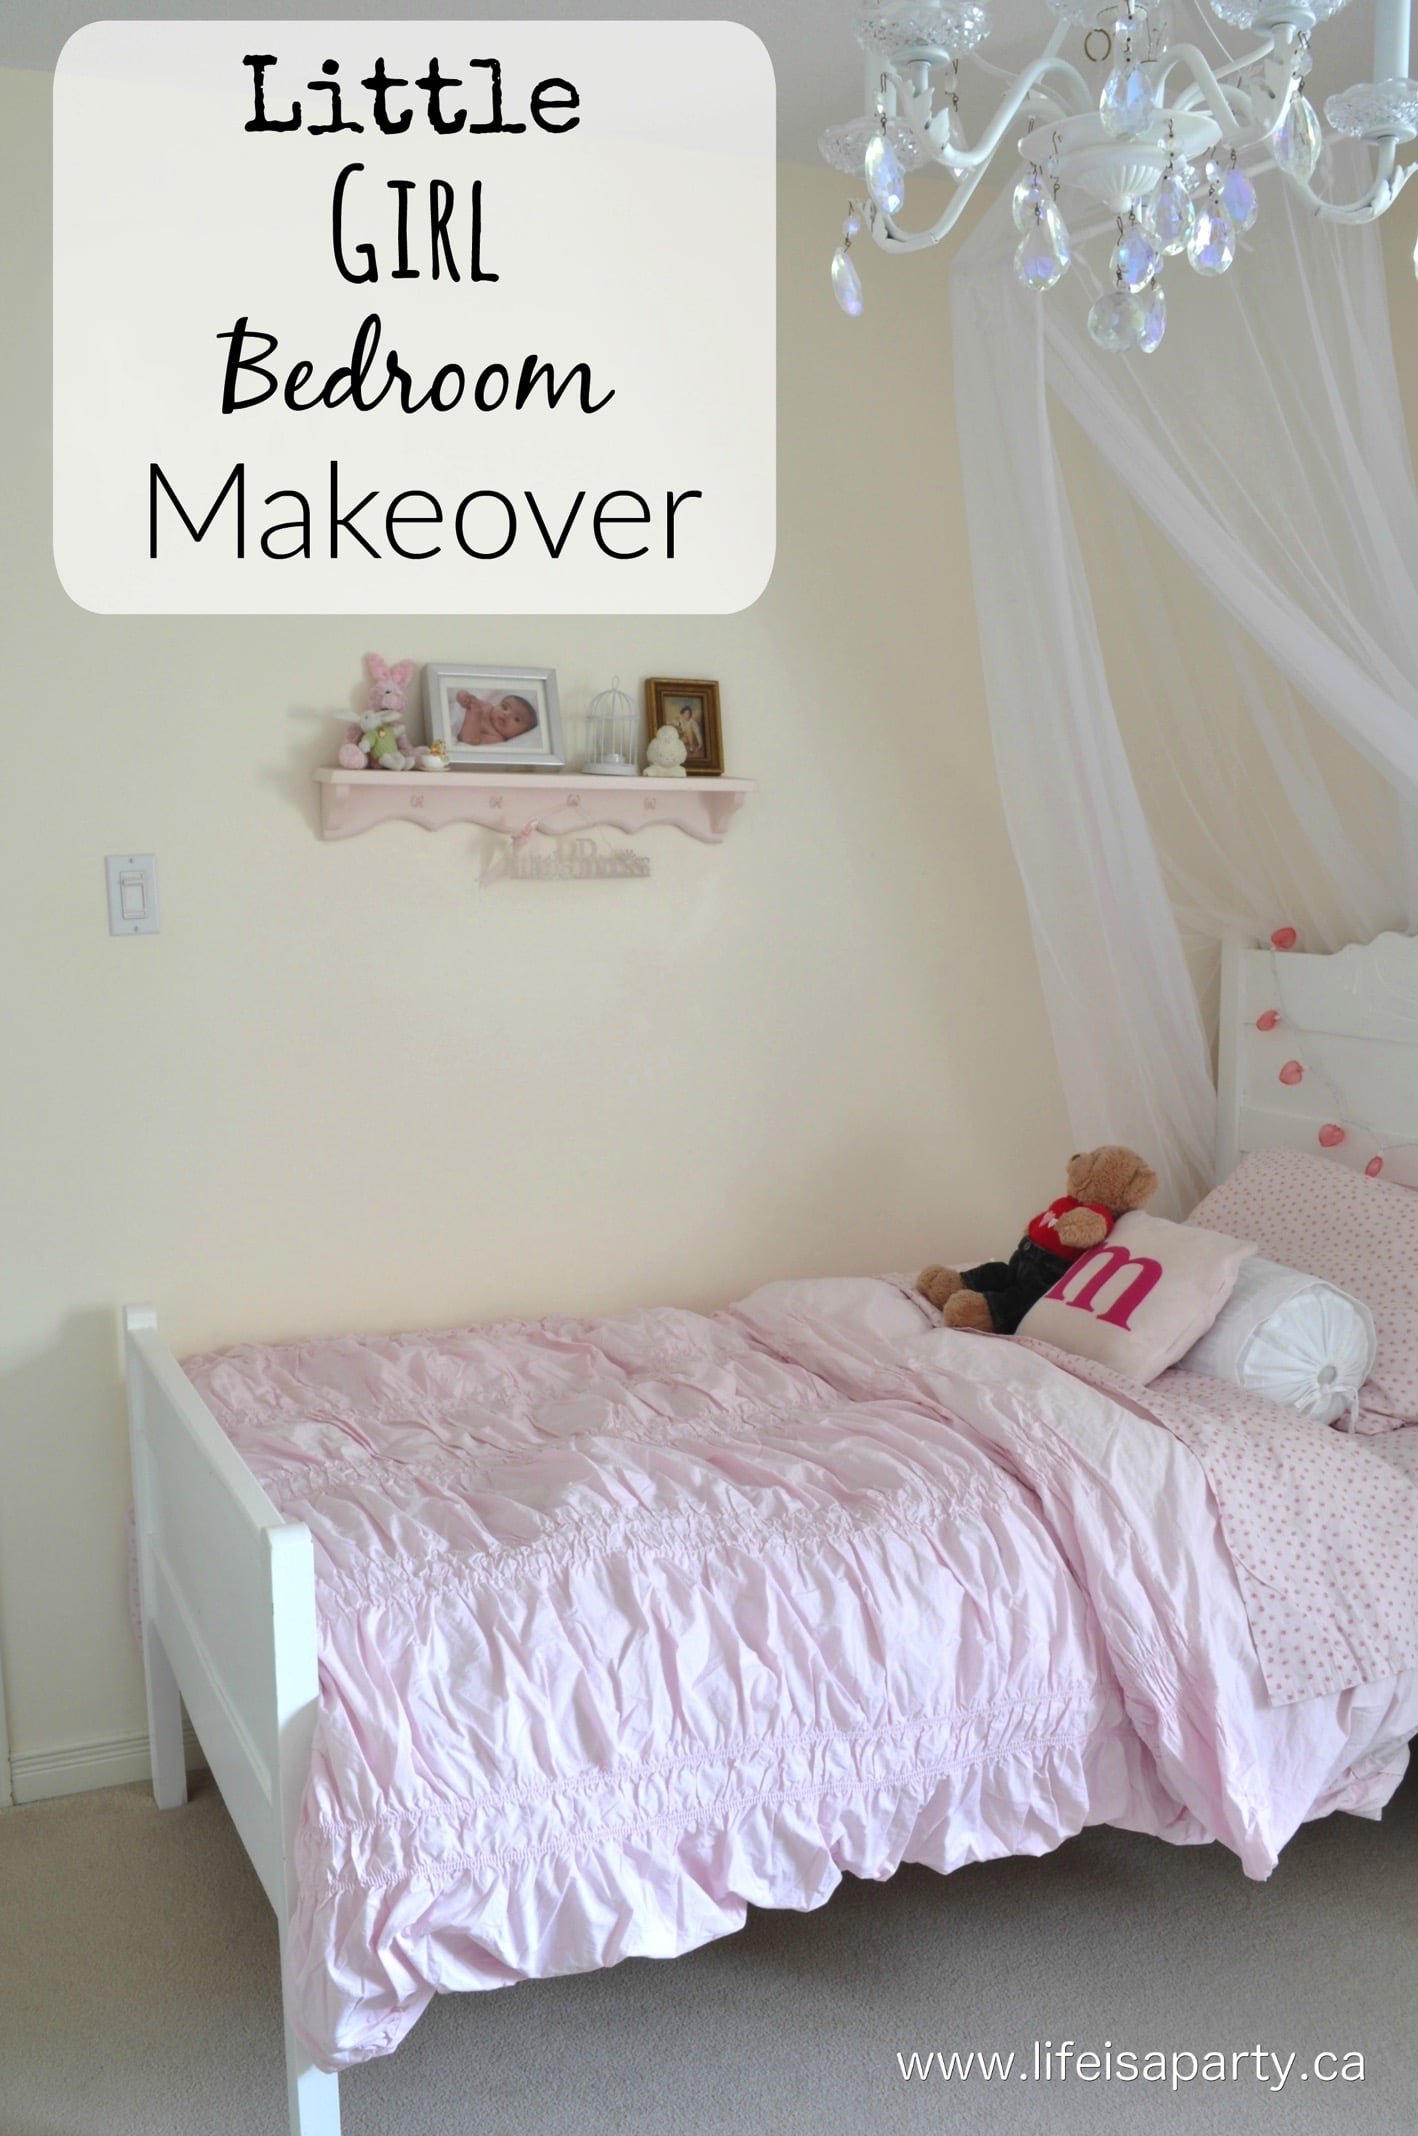 Little Girl Bedroom Makeover: Inspiration for a pretty, pink girls bedroom makeover, with a touch of vintage little girls bedroom.